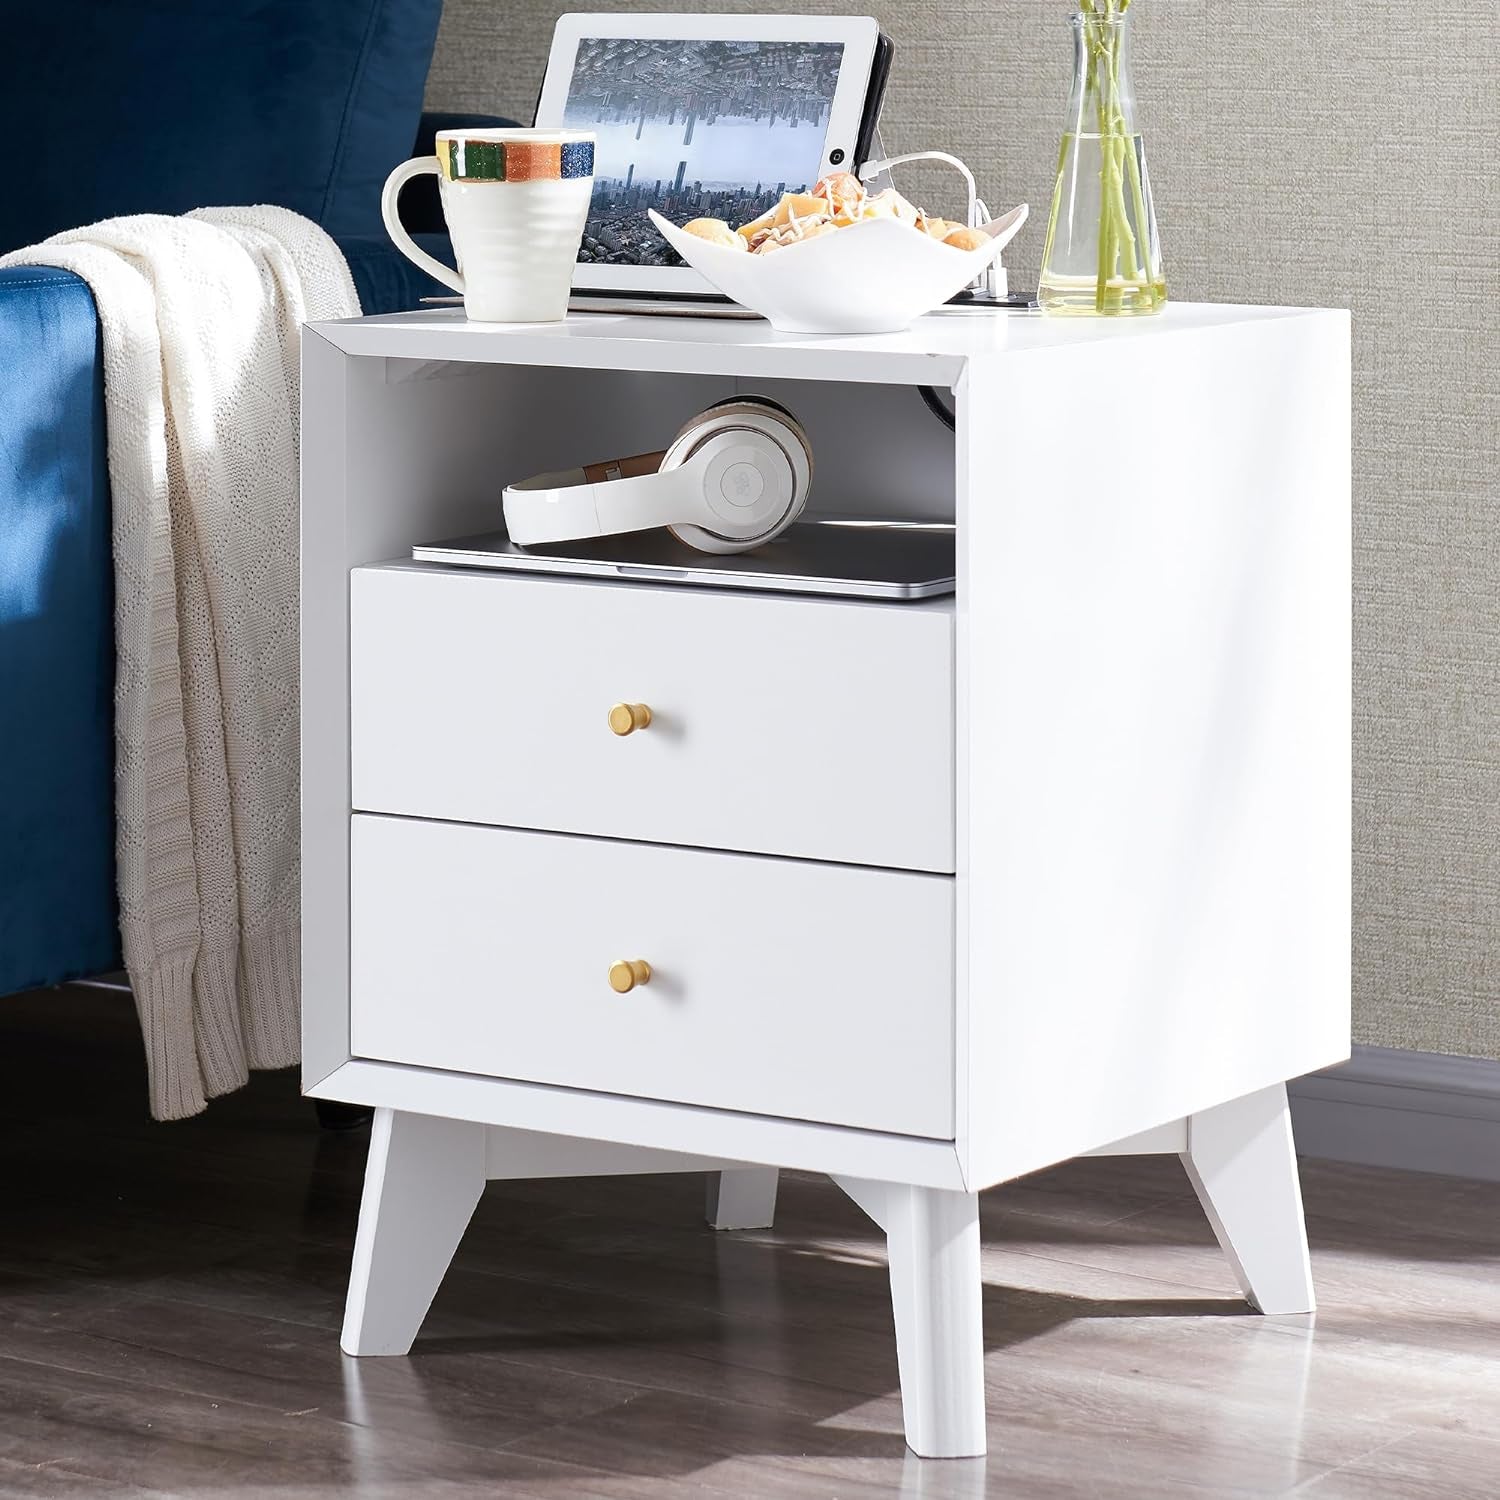 Nightstand with Charging Station, Modern End Table, Bedside Table with 2 Drawers, Mid Century Side Table Storage Cabinet for Bedroom, Living Room, Home Office, Solid White